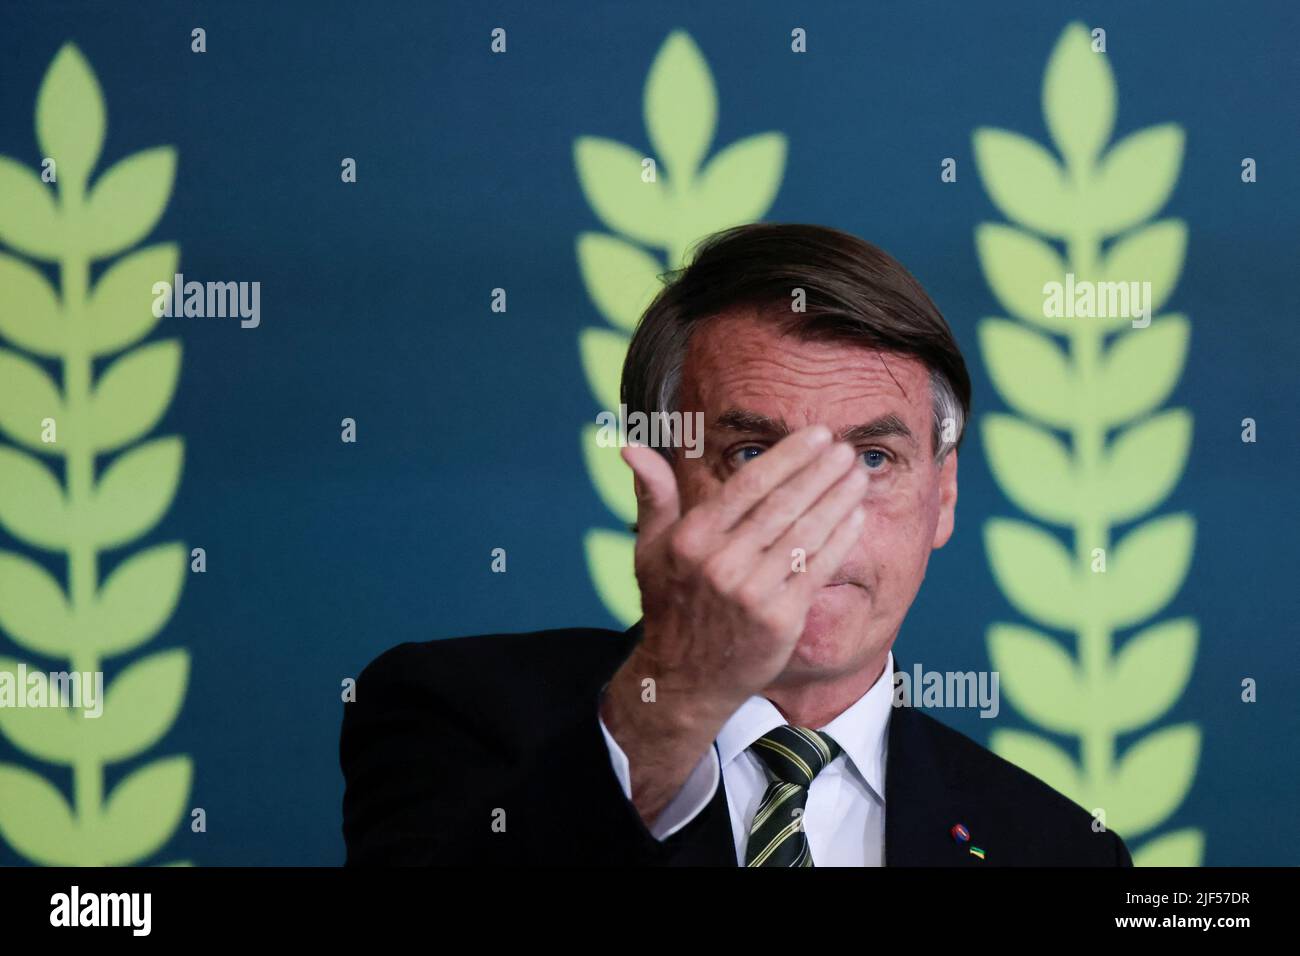 Brazil?s President Jair Bolsonaro gestures during the launching ceremony of the Plano Safra 2021/2022, an action plan for the agricultural sector, in Brasilia, Brazil June 29, 2022. REUTERS/Ueslei Marcelino Stock Photo